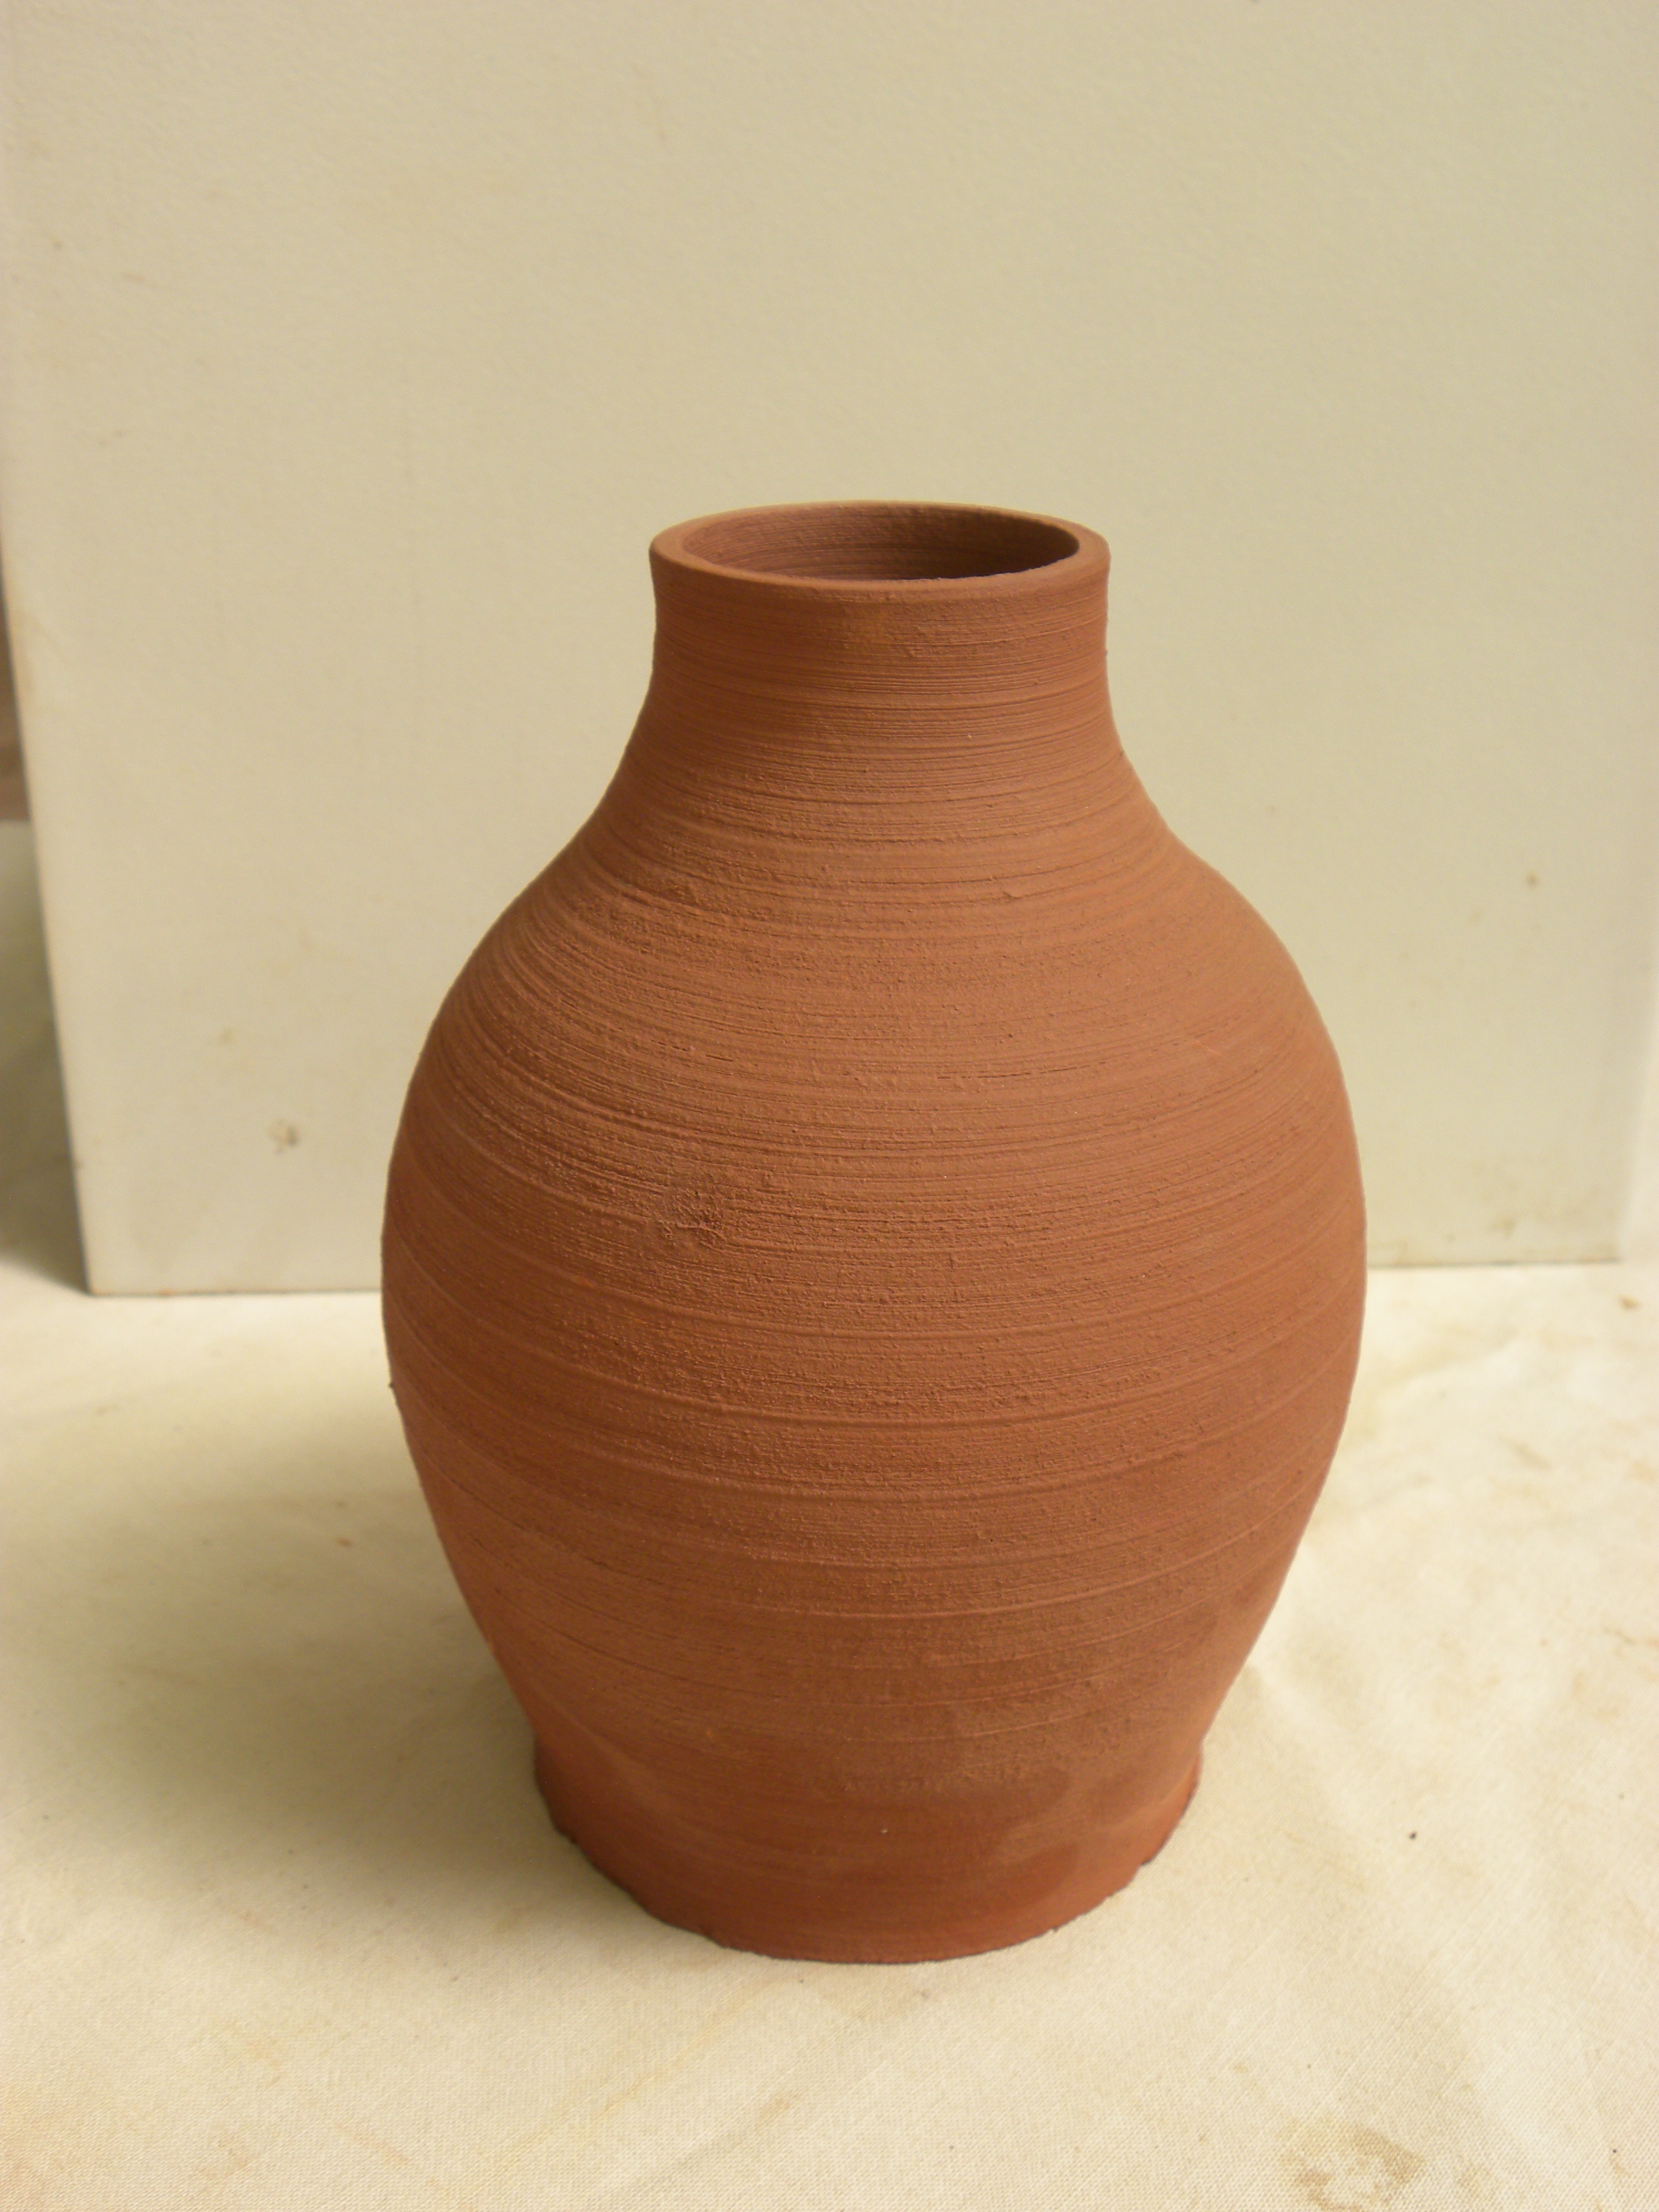 Clay Pots Wallpapers High Quality